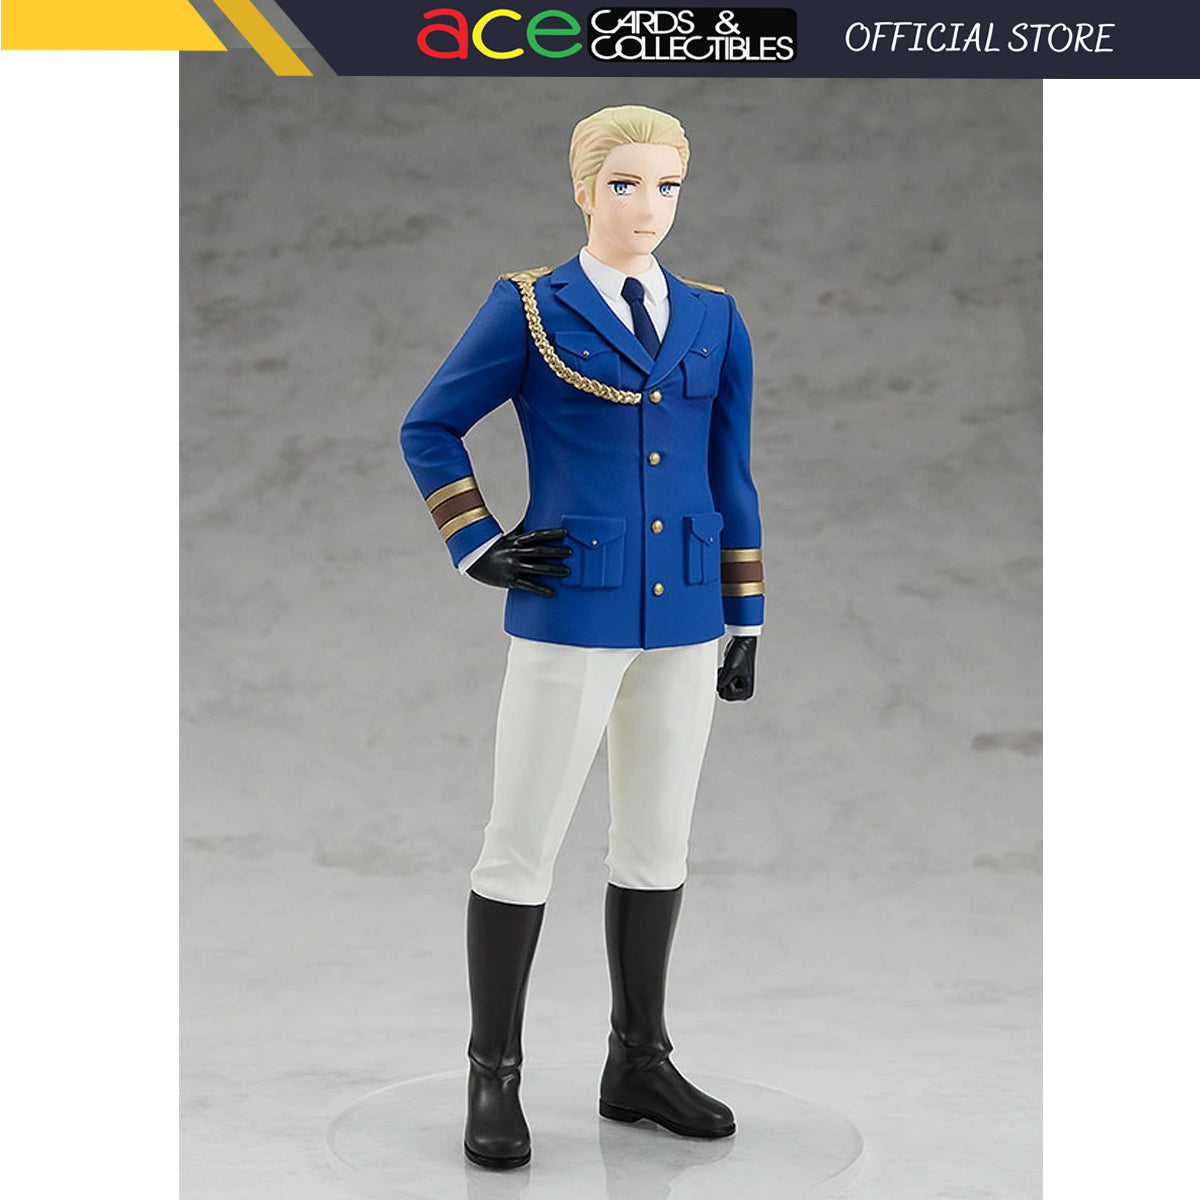 Hetalia World★Stars Pop Up Parade "Germany"-Good Smile Company-Ace Cards & Collectibles